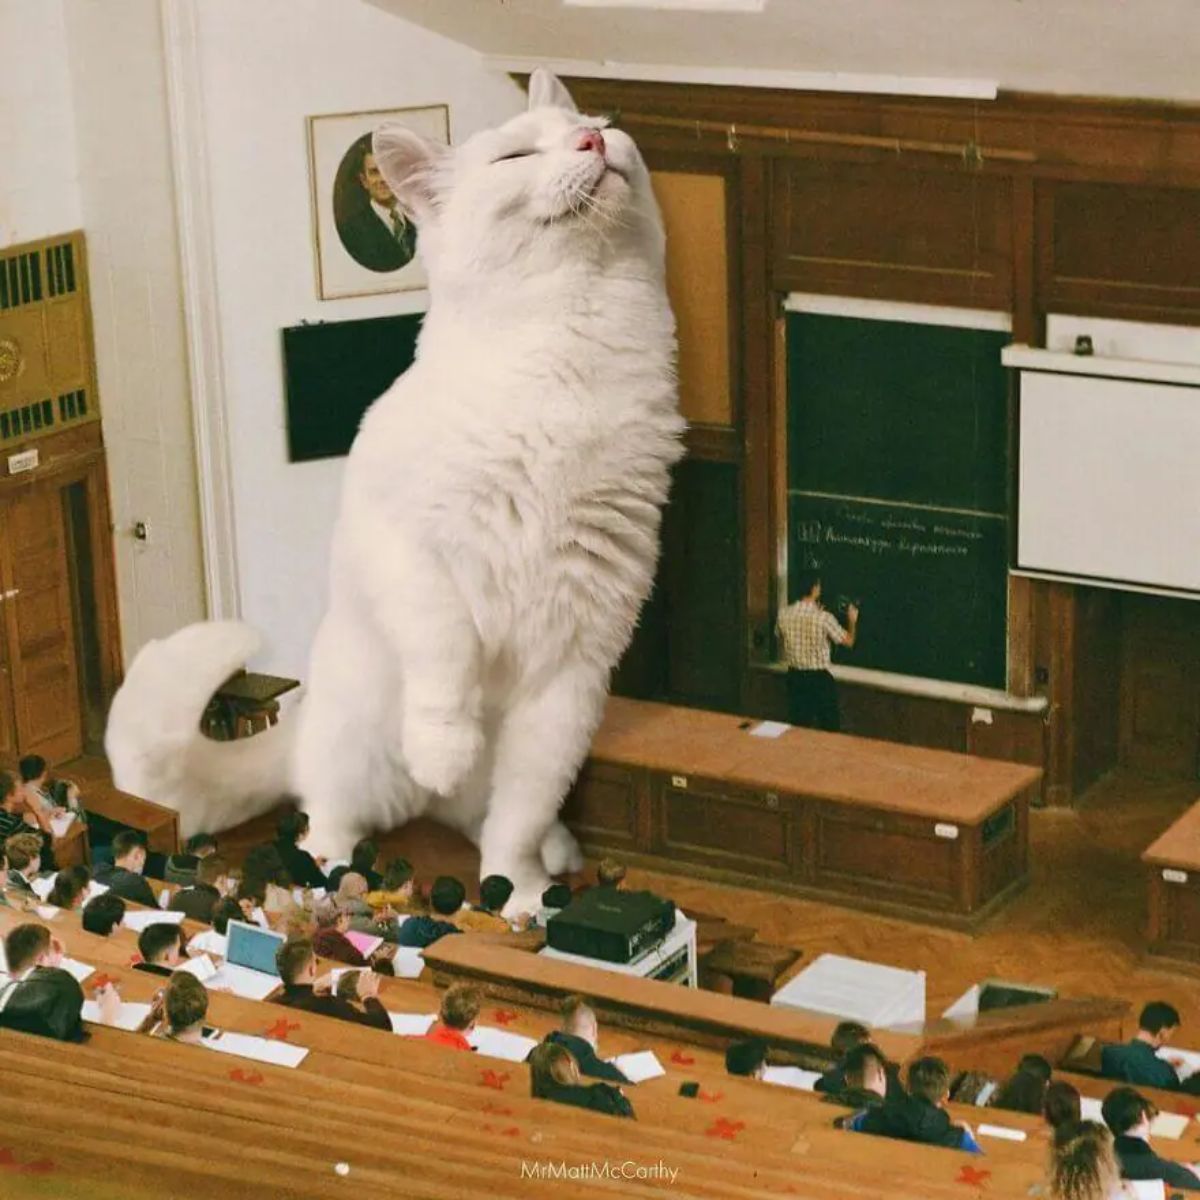 large photoshopped white cat standing in a university classroom